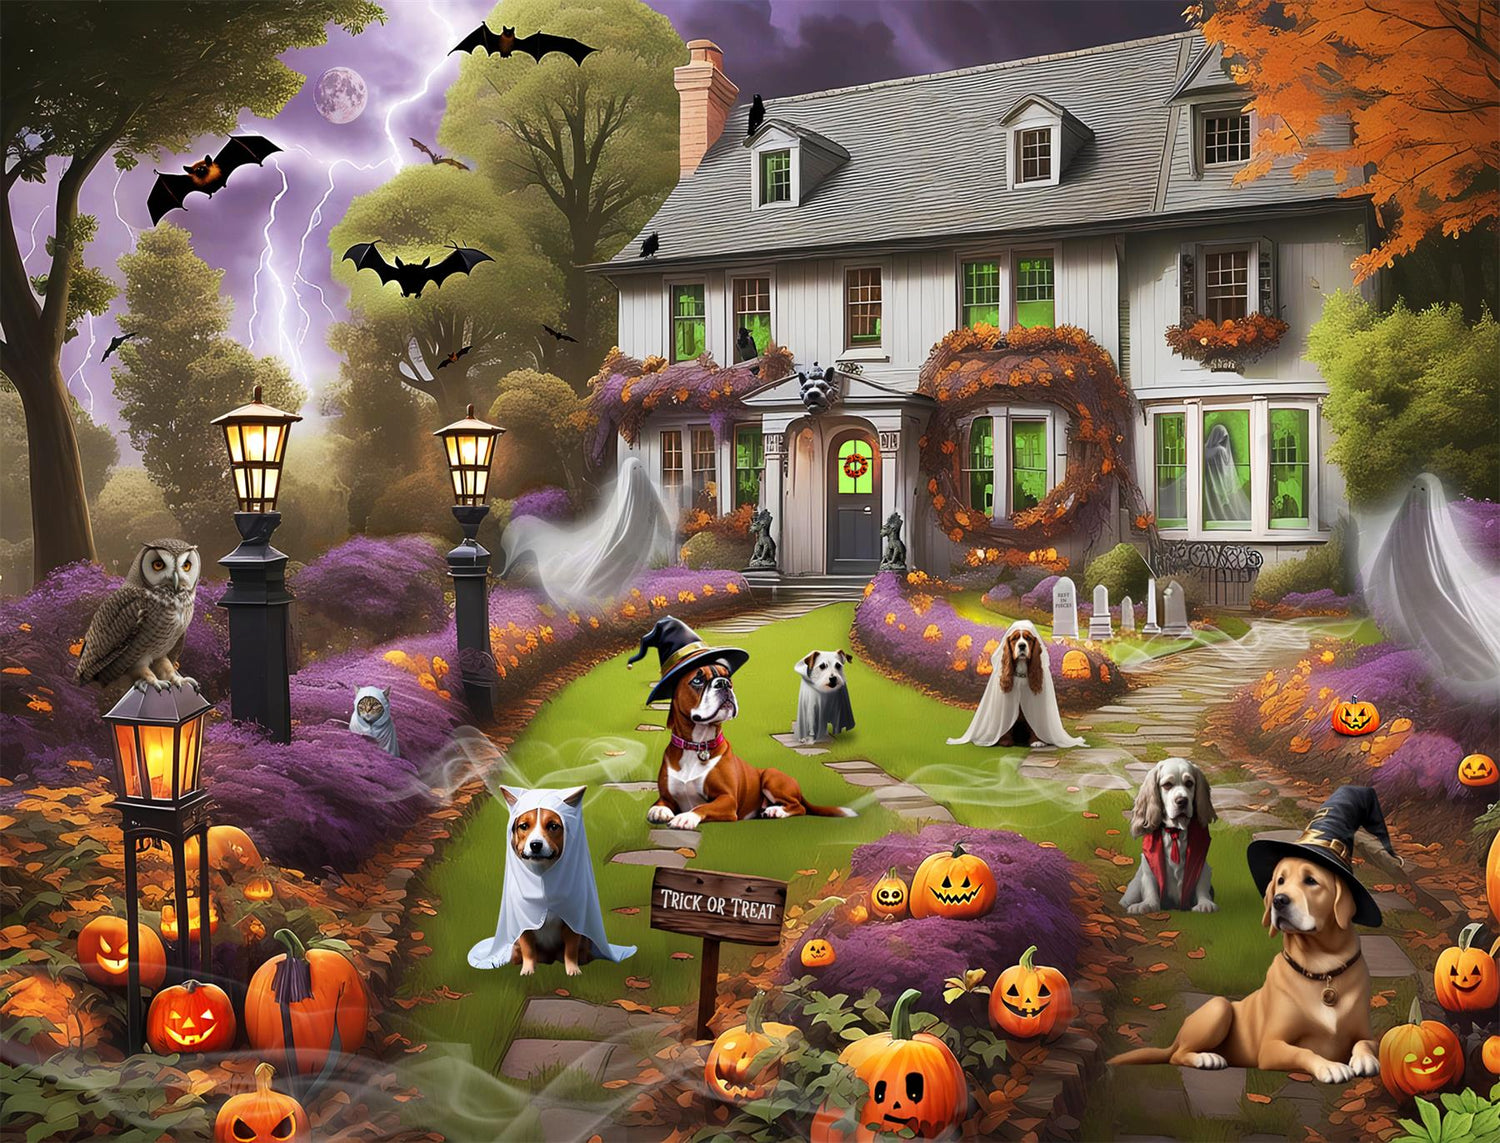 Autumn and Halloween Jigsaw Puzzles